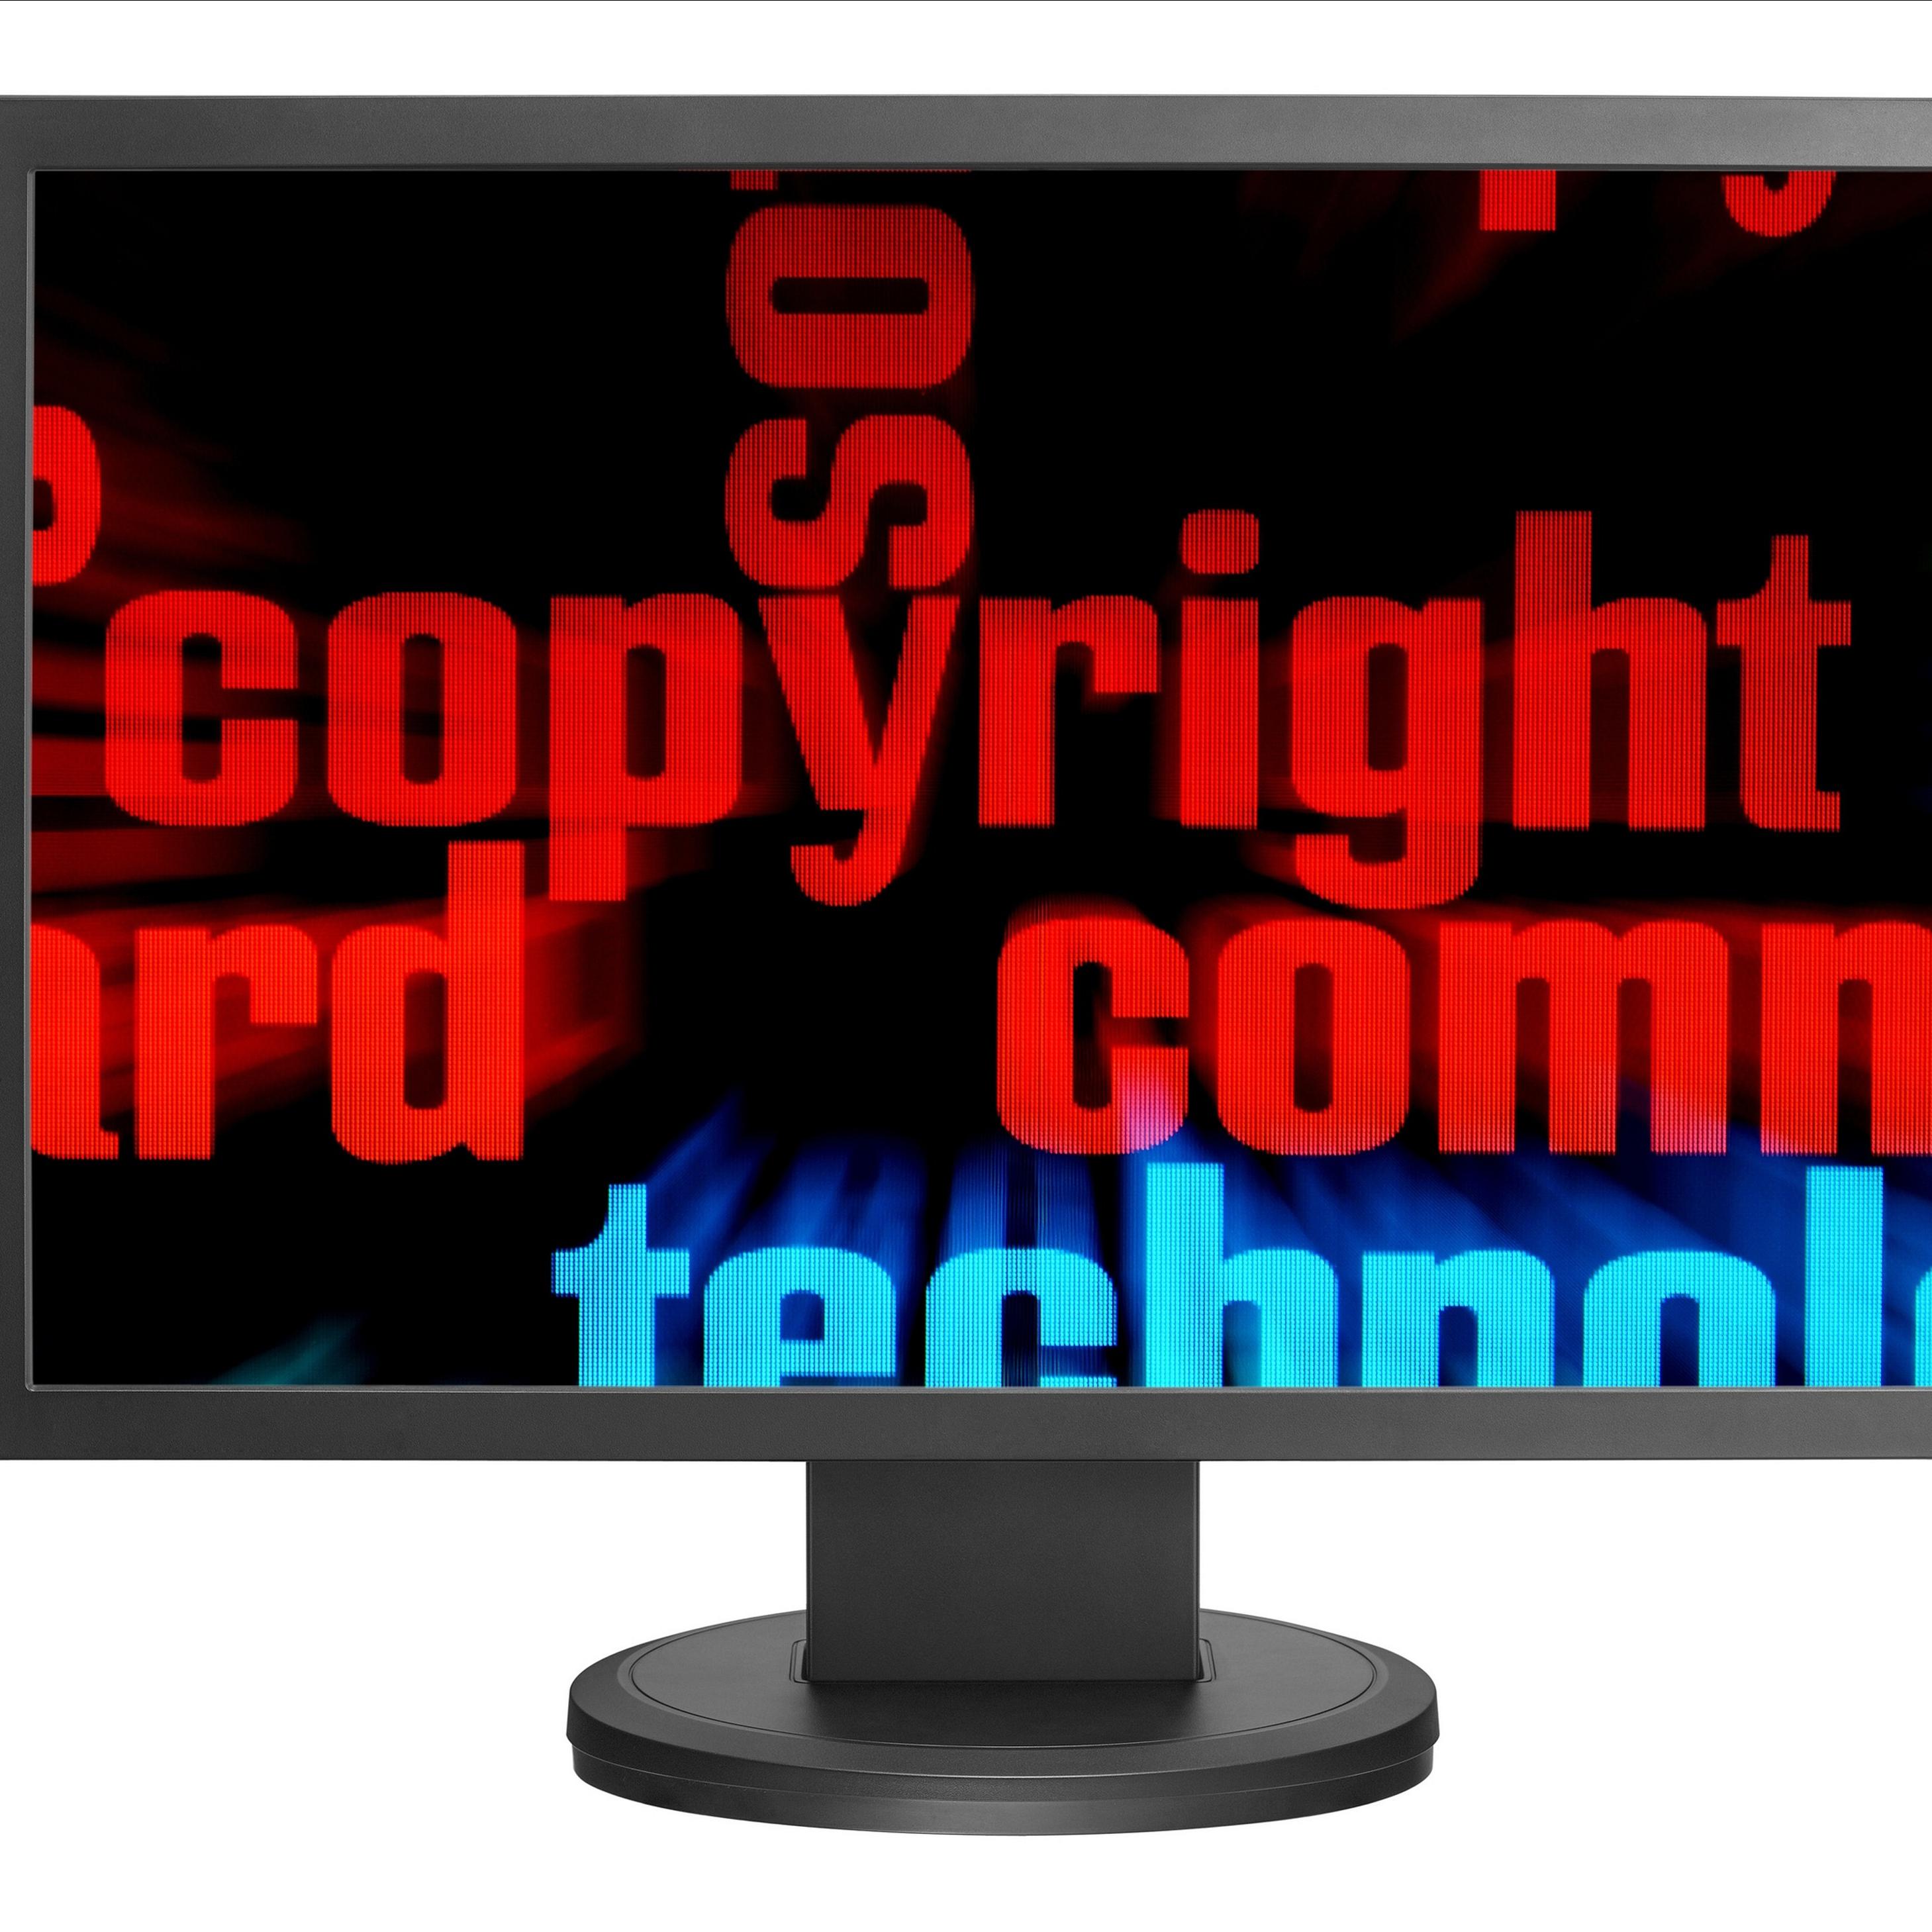 Red lettering reading copyright on a black computer screen